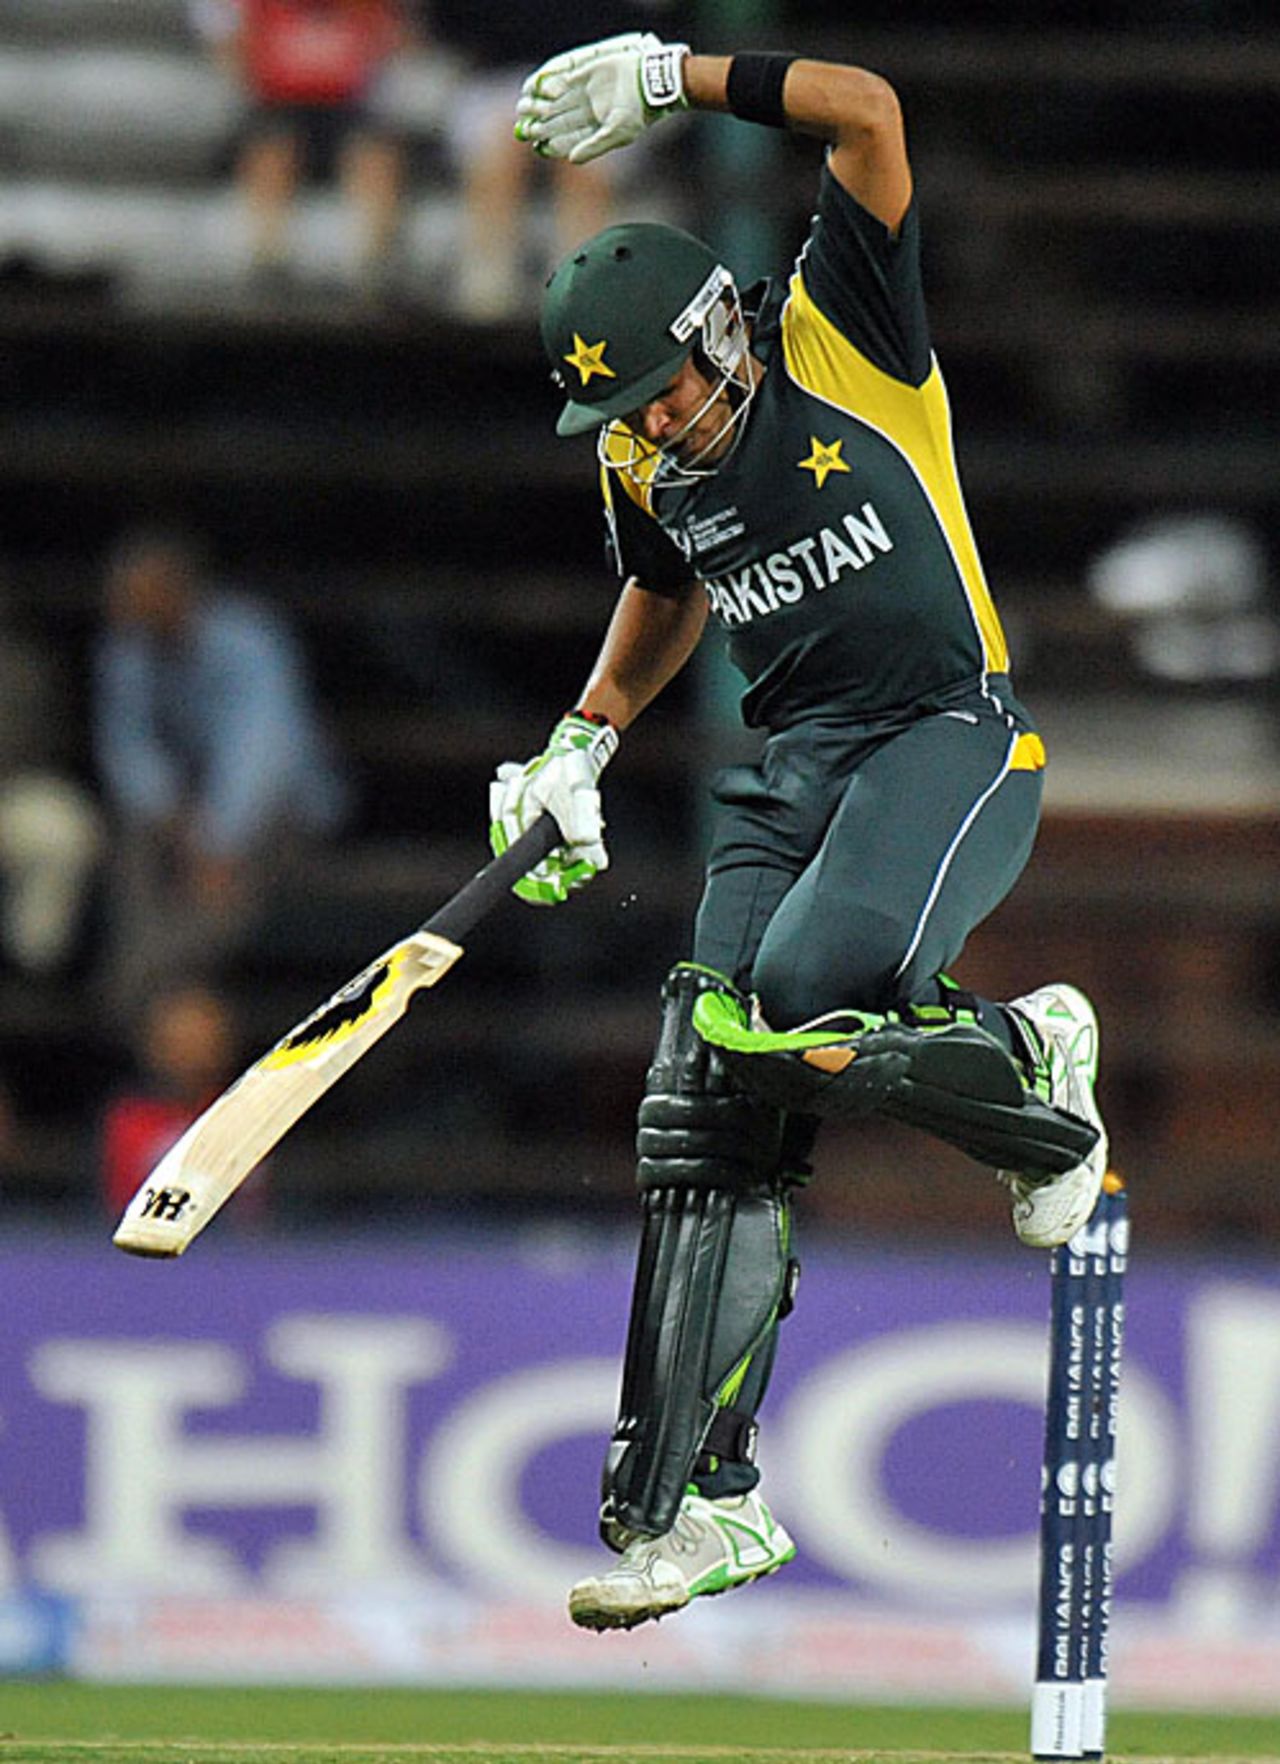 Umar Akmal winces in pain after taking the beamer on his knuckle, Pakistan v West Indies, ICC Champions Trophy, Group A, Johannesburg, September 23, 2009